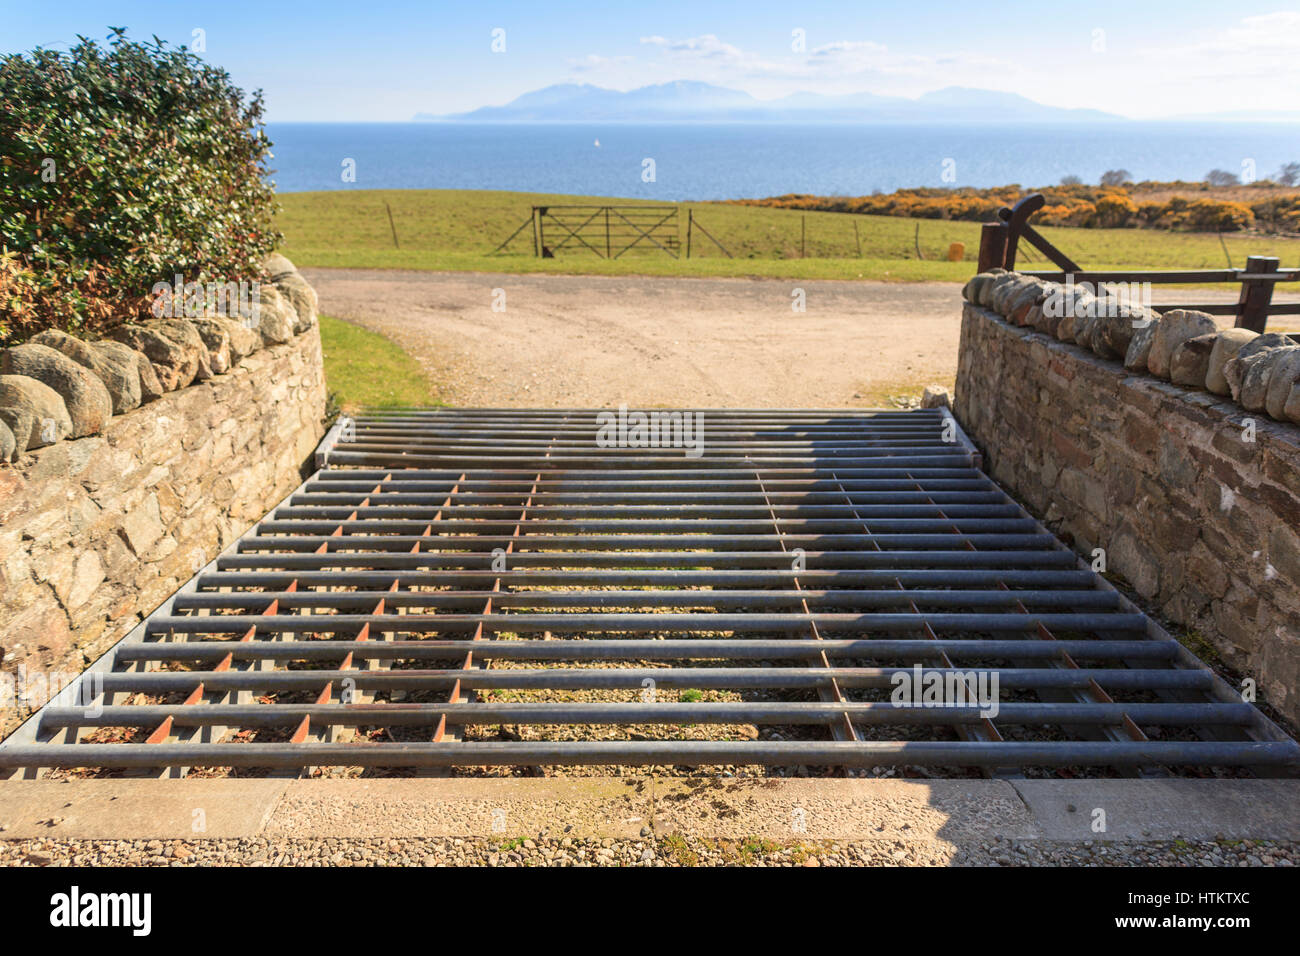 Property cattle grid or cattle guard entrance or exit onto public road in rural countryside area  Model Release: No.  Property Release: No. Stock Photo